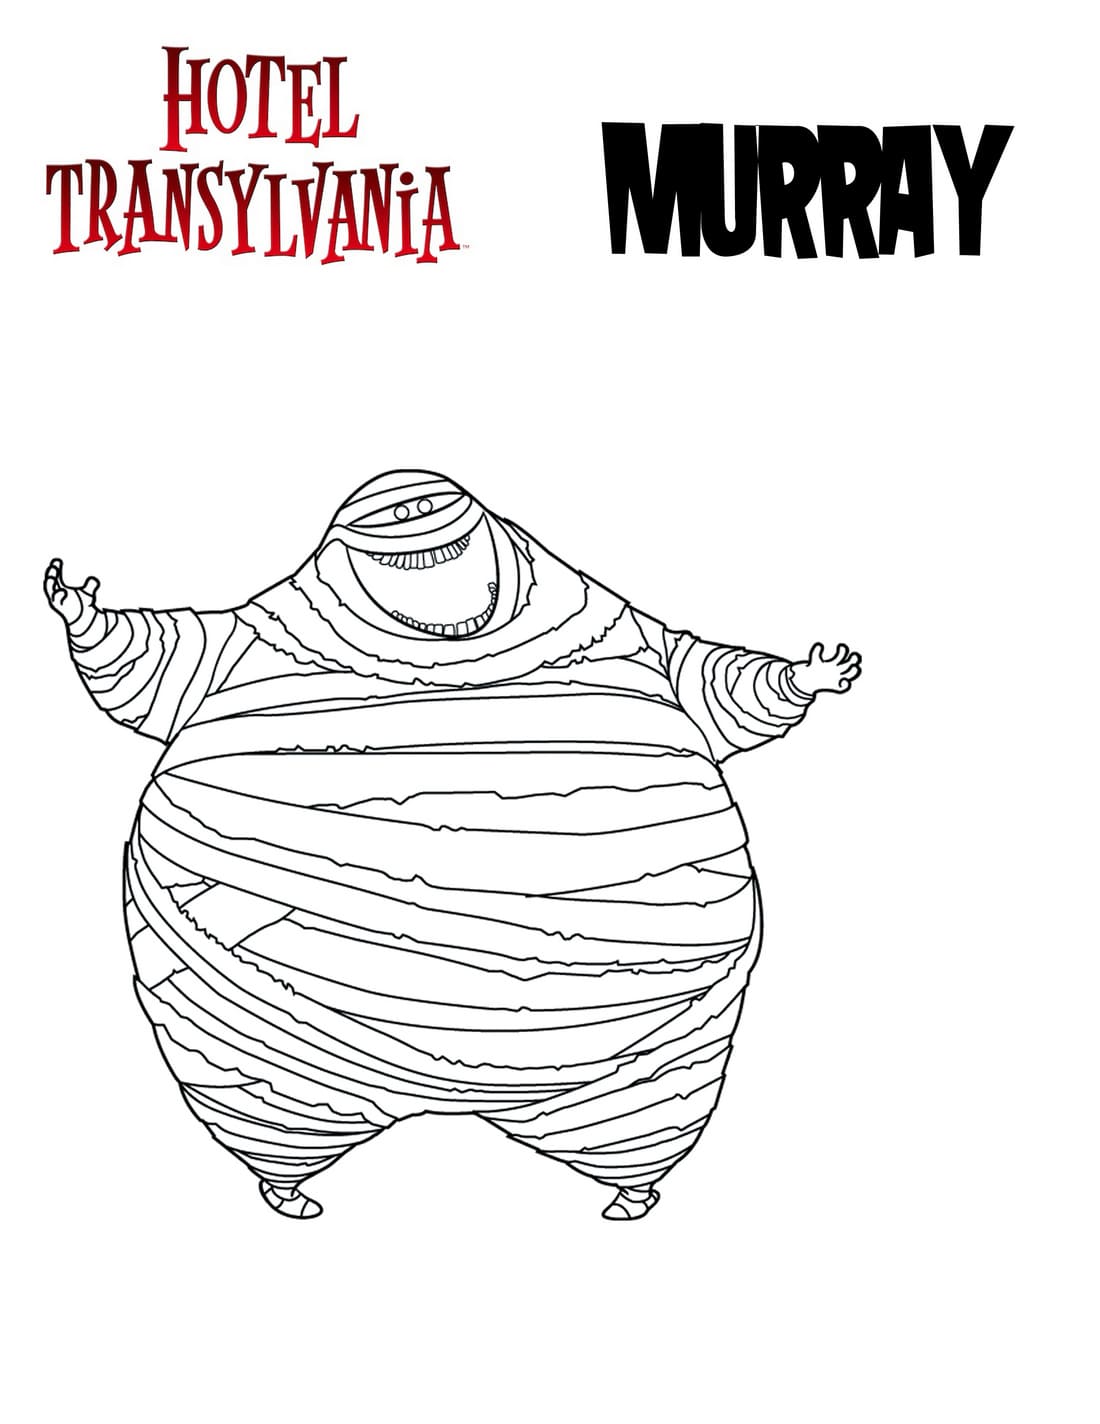 Hotel Transylvania Coloring Pages | WONDER DAY — Coloring pages for  children and adults